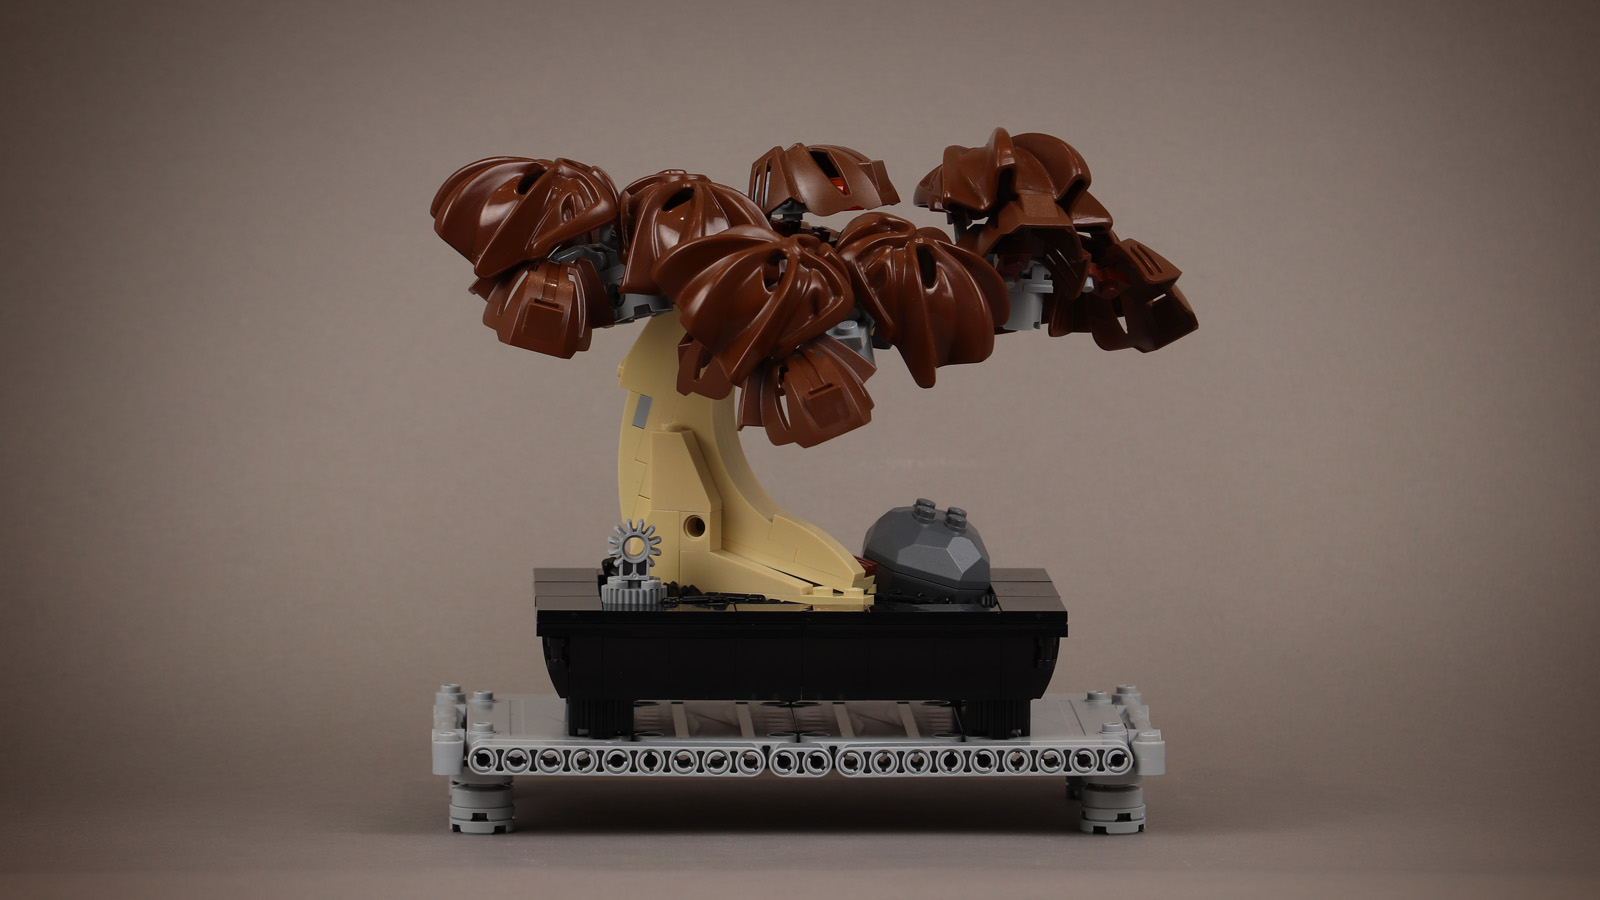 LEGO® Designers interview: 10281 Bonsai Tree  New Elementary: LEGO® parts,  sets and techniques